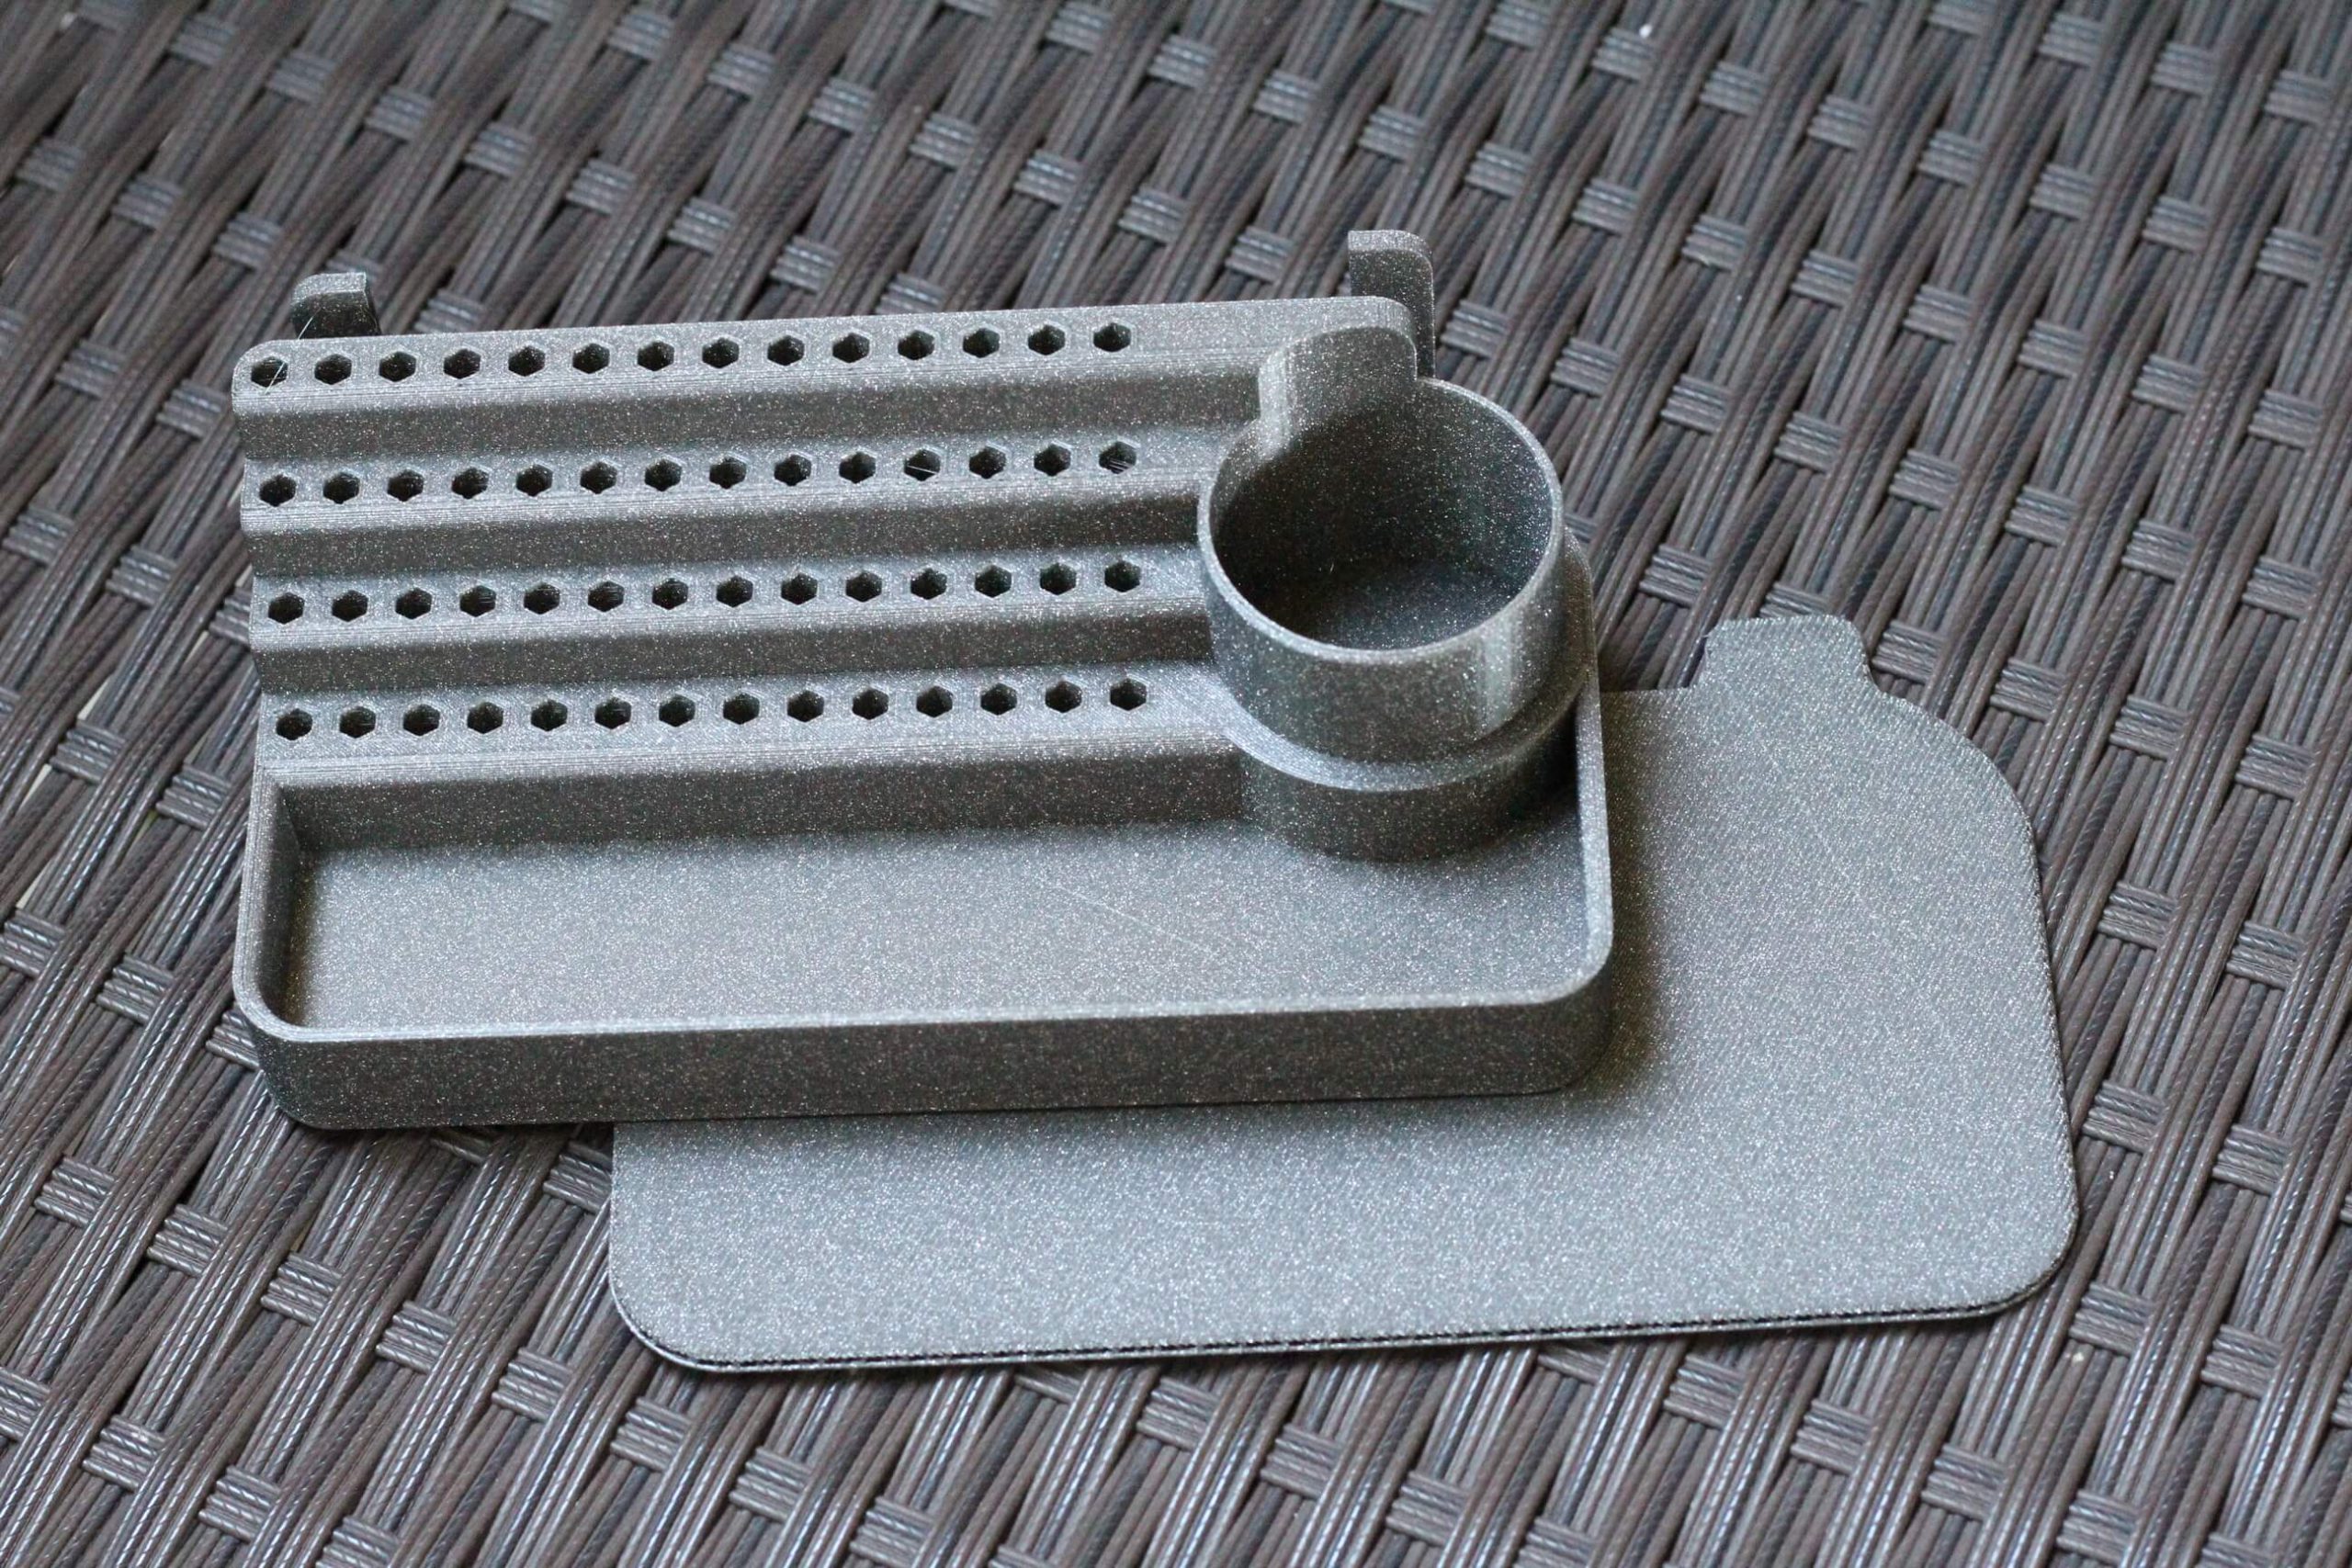 Wowstick Bits Holder Raise E2 Review 4 scaled | 3D Printing Filament Review: Which one is best?